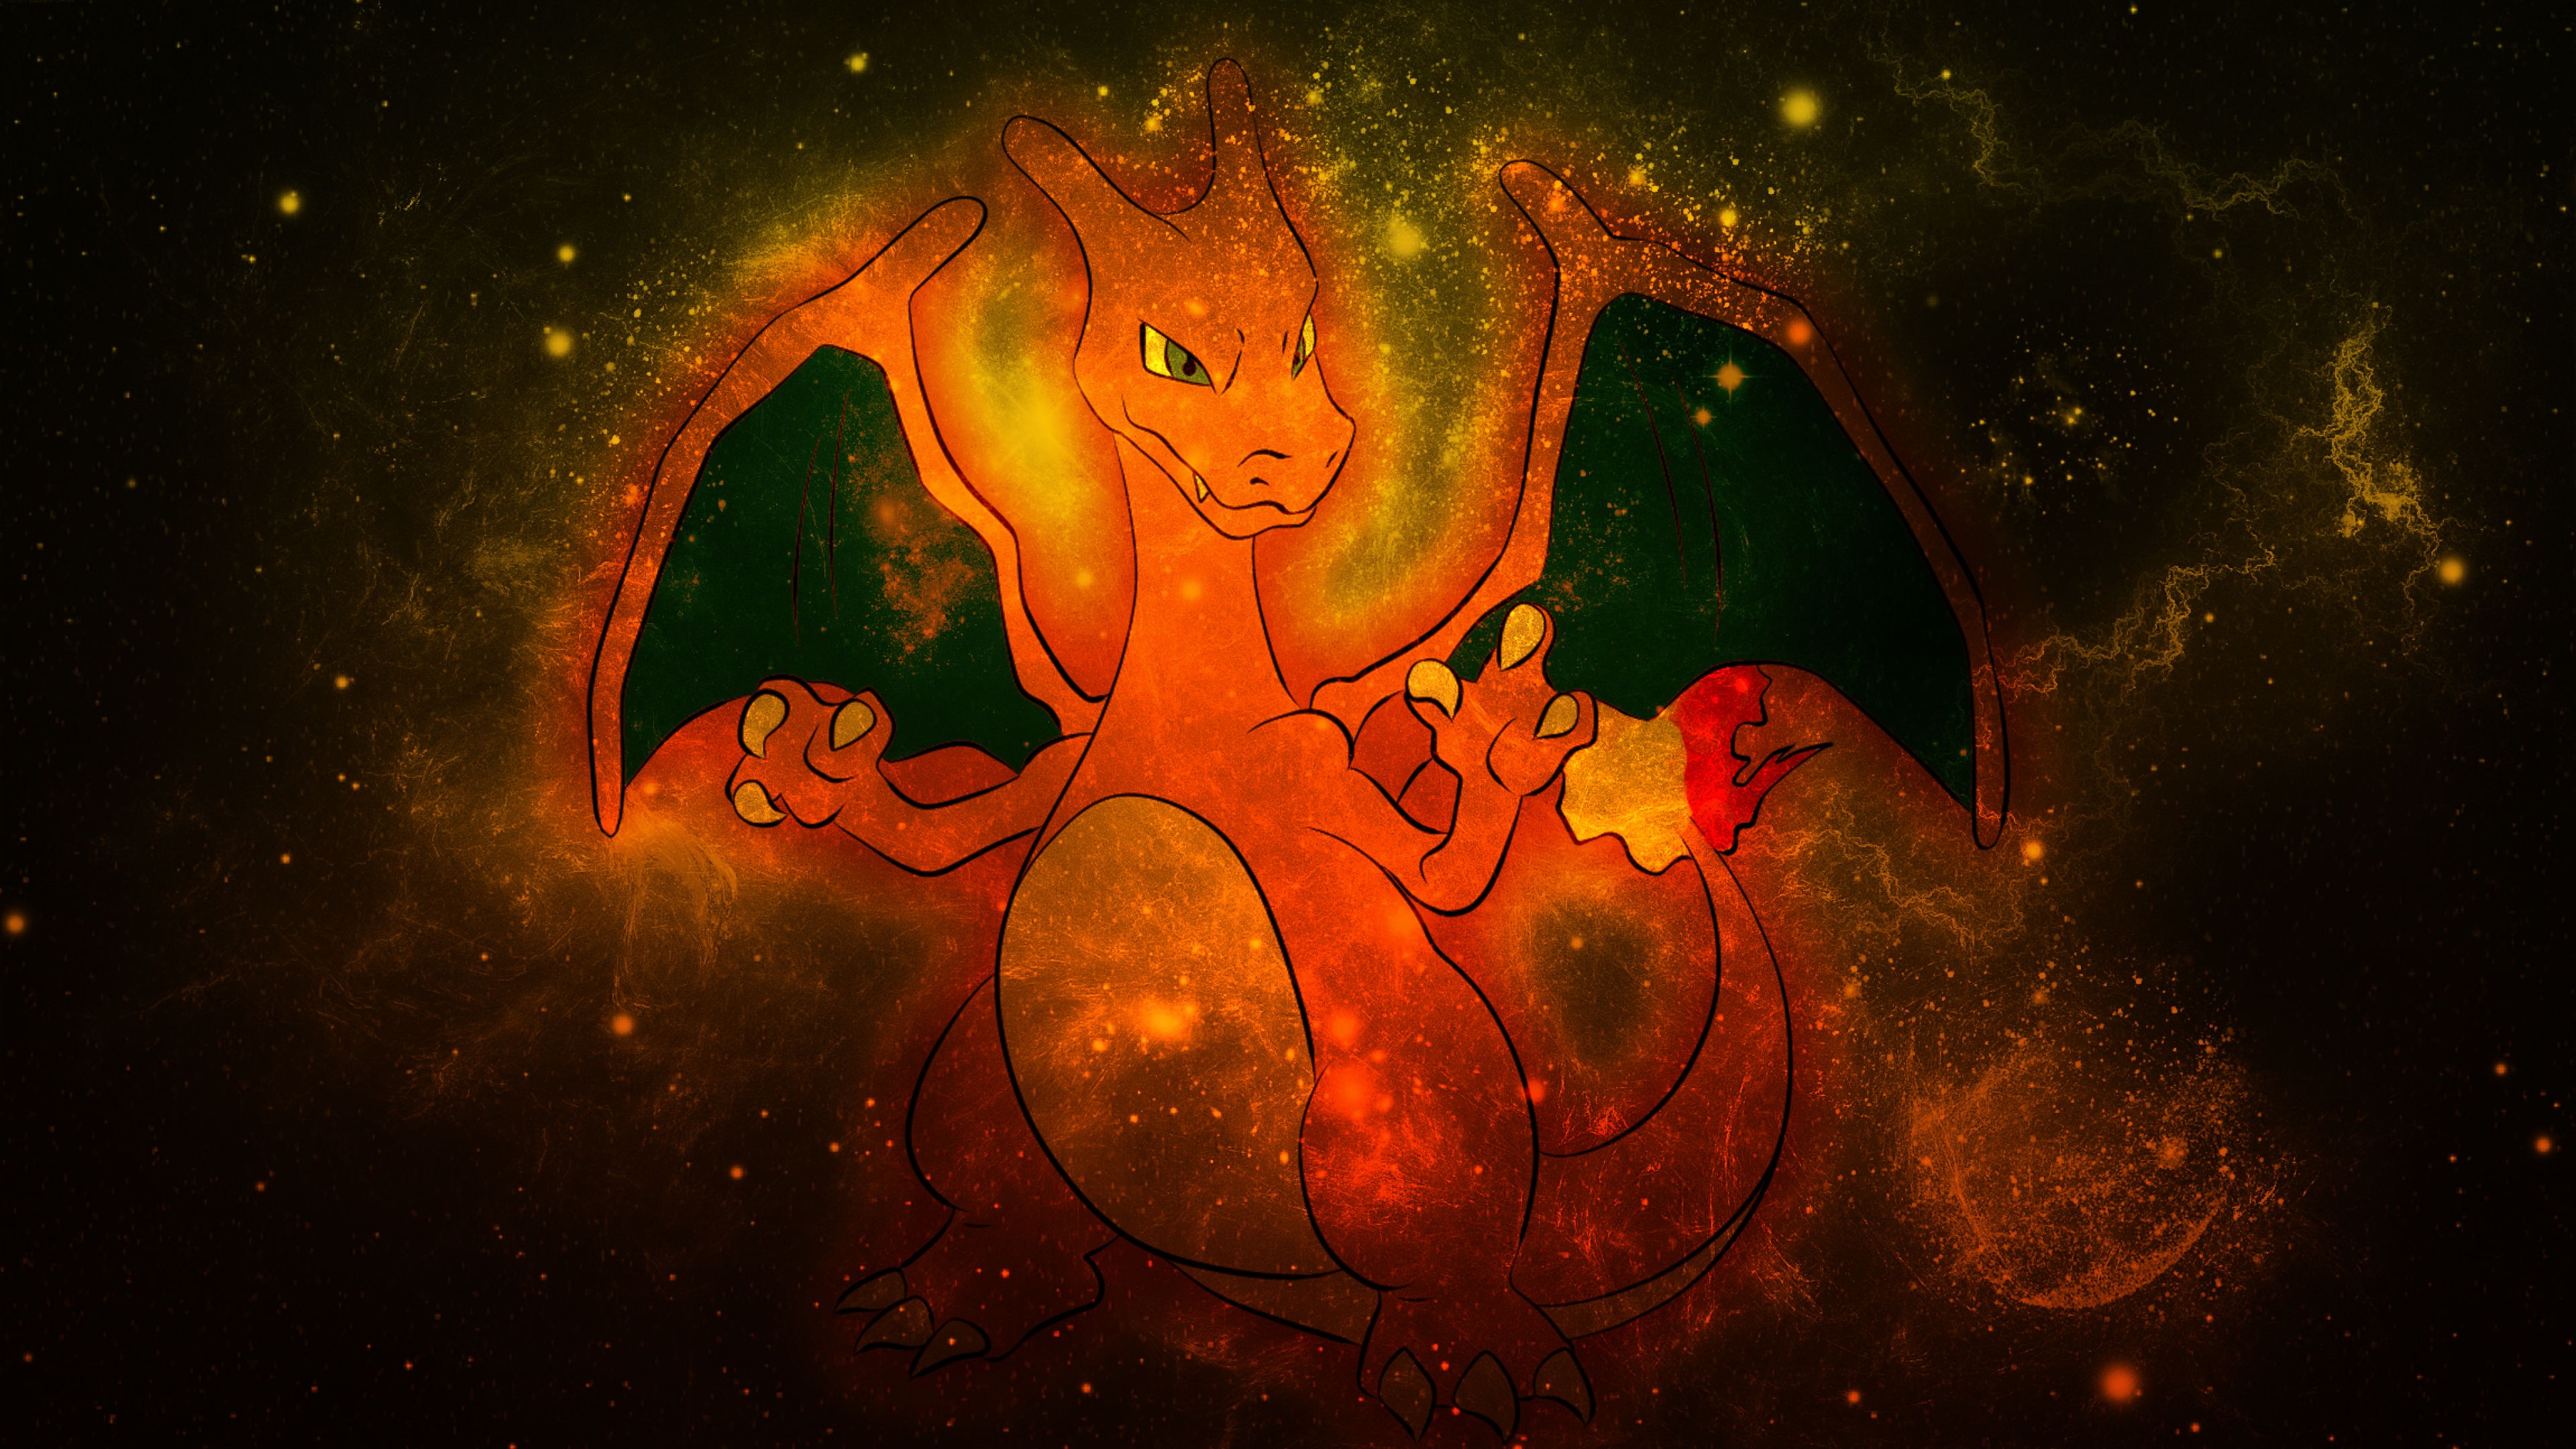 Charizard Wallpaper Image Photo Picture Background